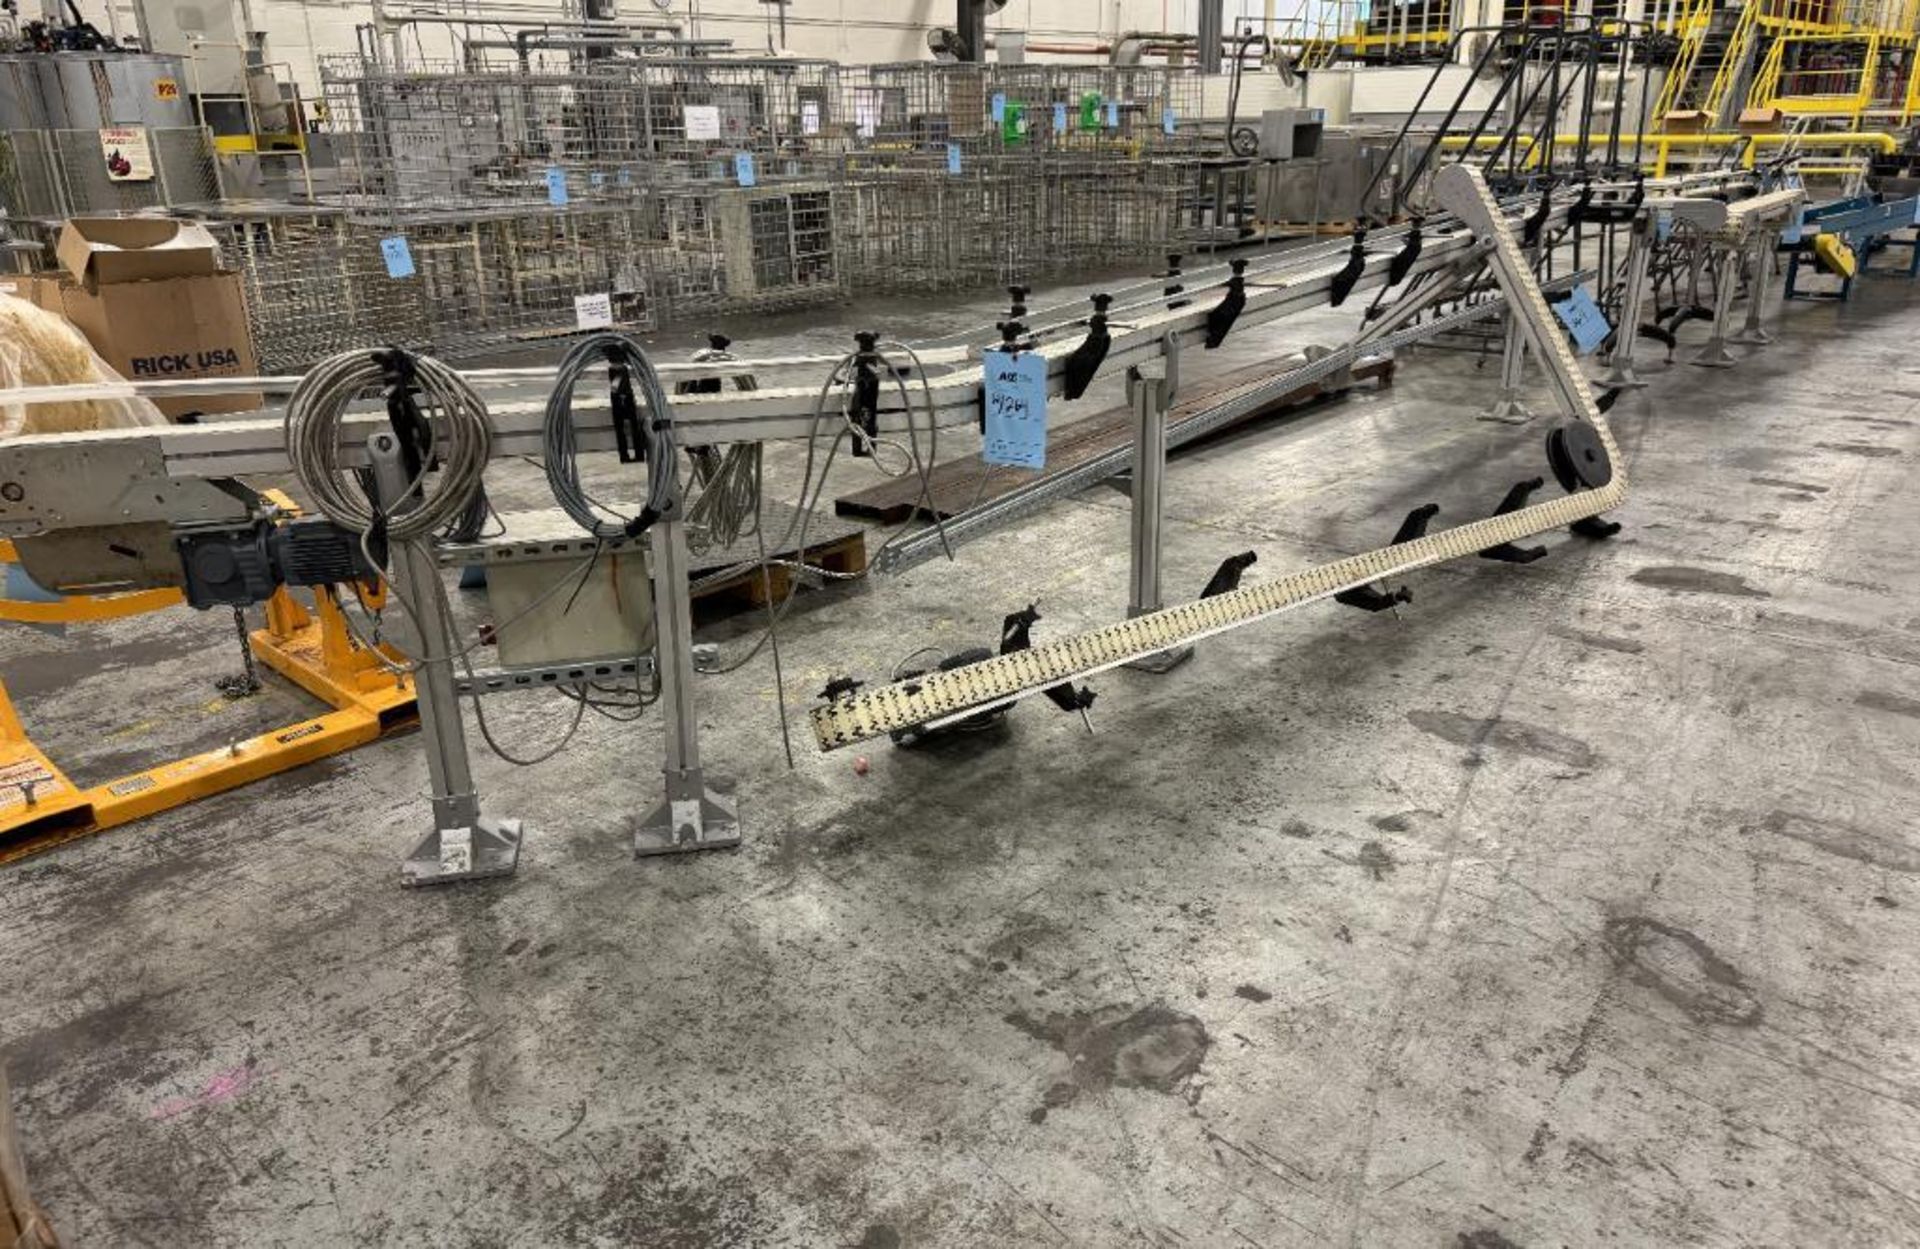 Lot Of Misc. Conveyor. With tabletop, belt and expandable.